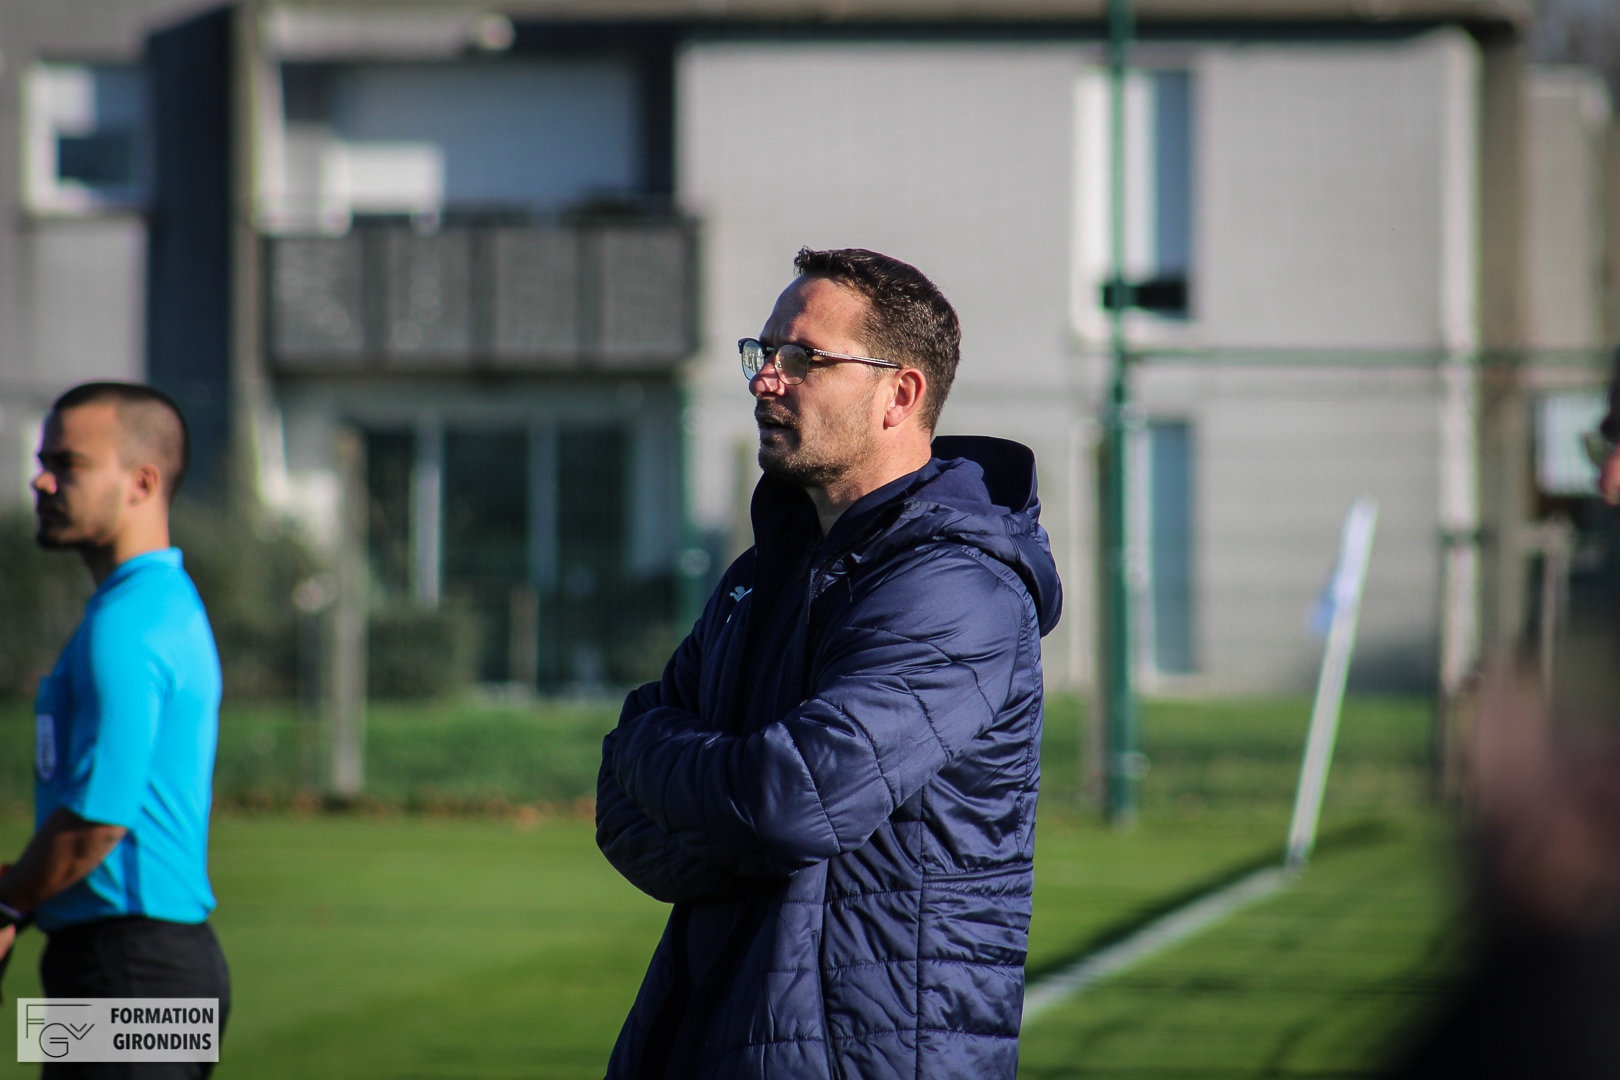 Cfa Girondins : Le planning des matchs amicaux - Formation Girondins 